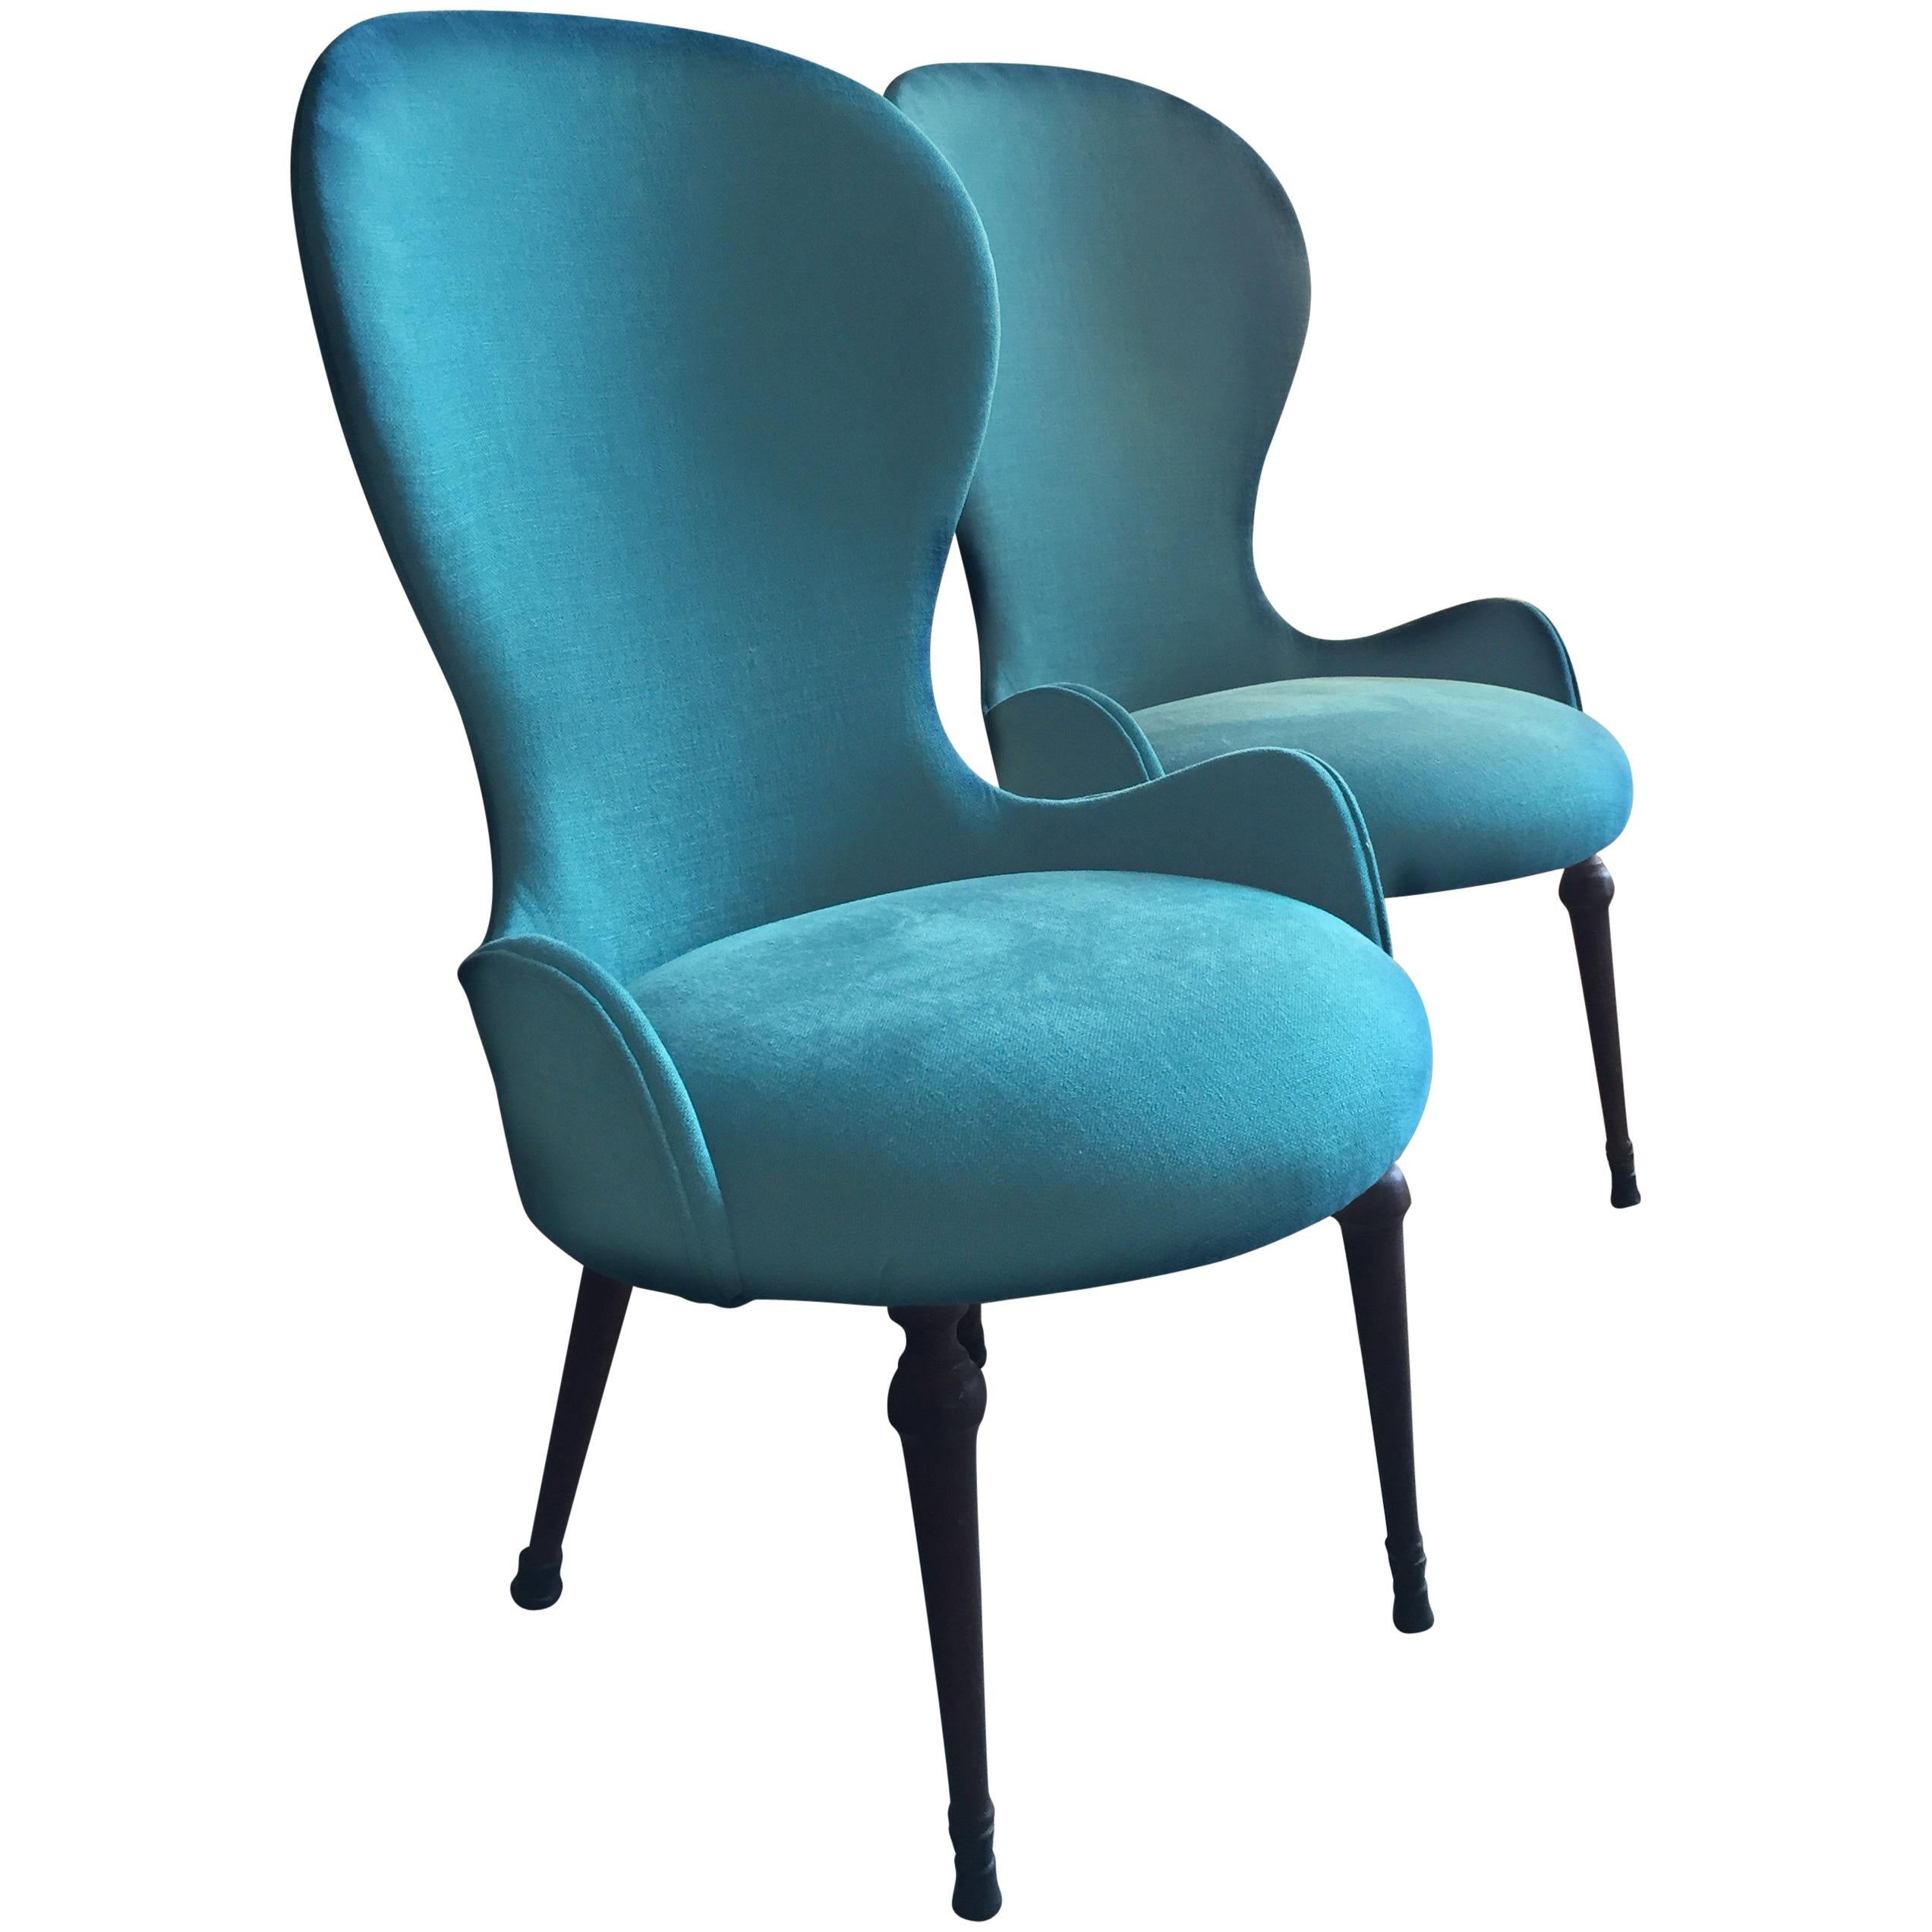 Déco High-Backed Italian Petrol Blue Lounge Chairs, 1940s For Sale